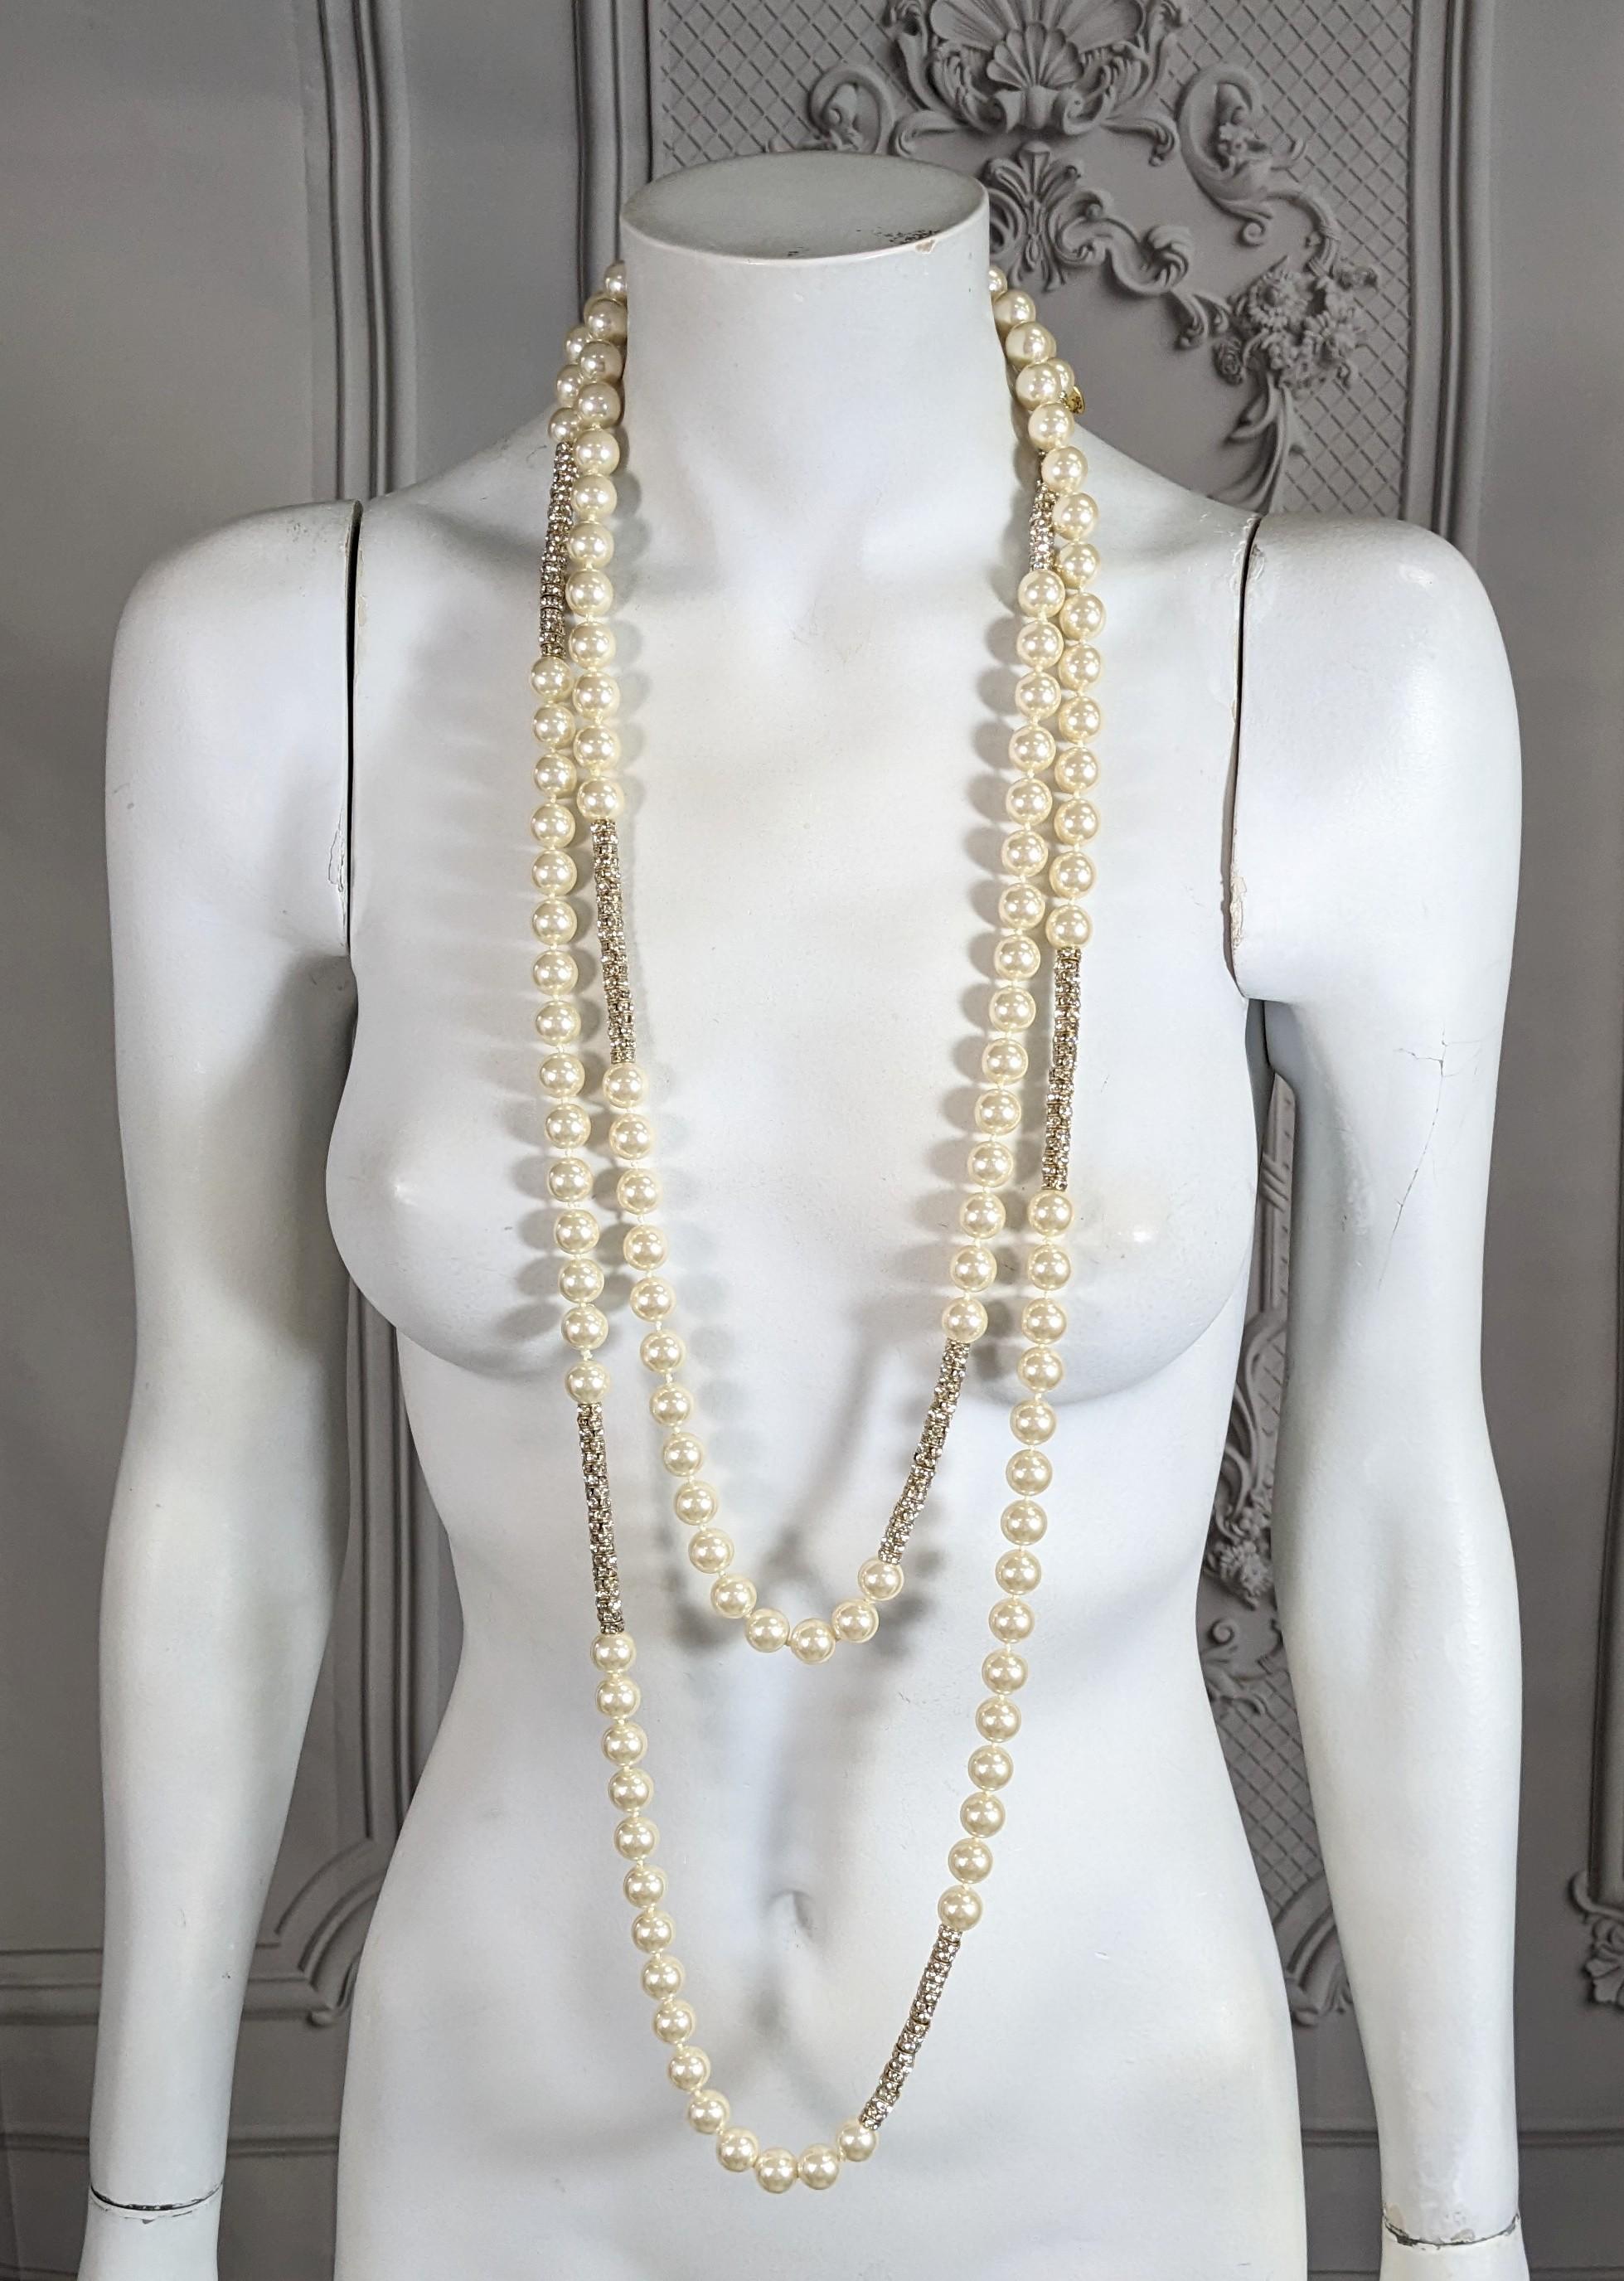 Rare Chanel Endless Pearl and Crystal Rondel Necklace For Sale 2